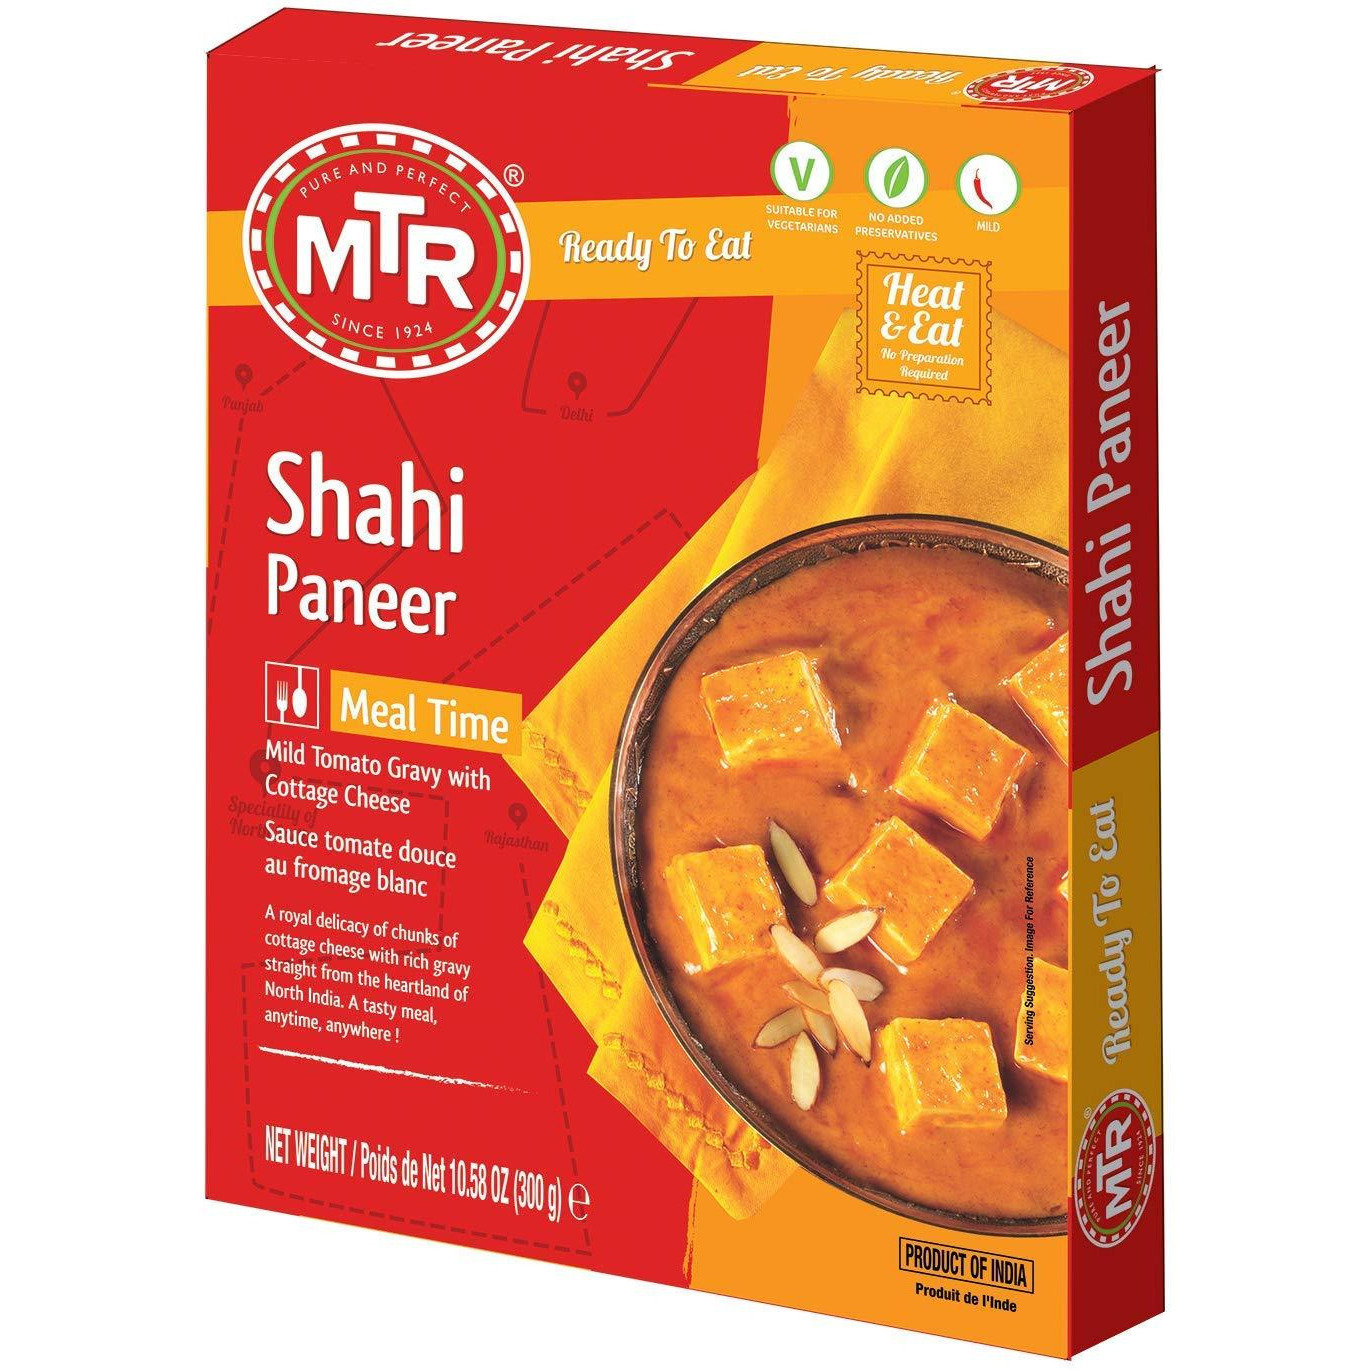 Pack of 2 - Mtr Ready To Eat Shahi Paneer - 300 Gm (10.58 Oz)